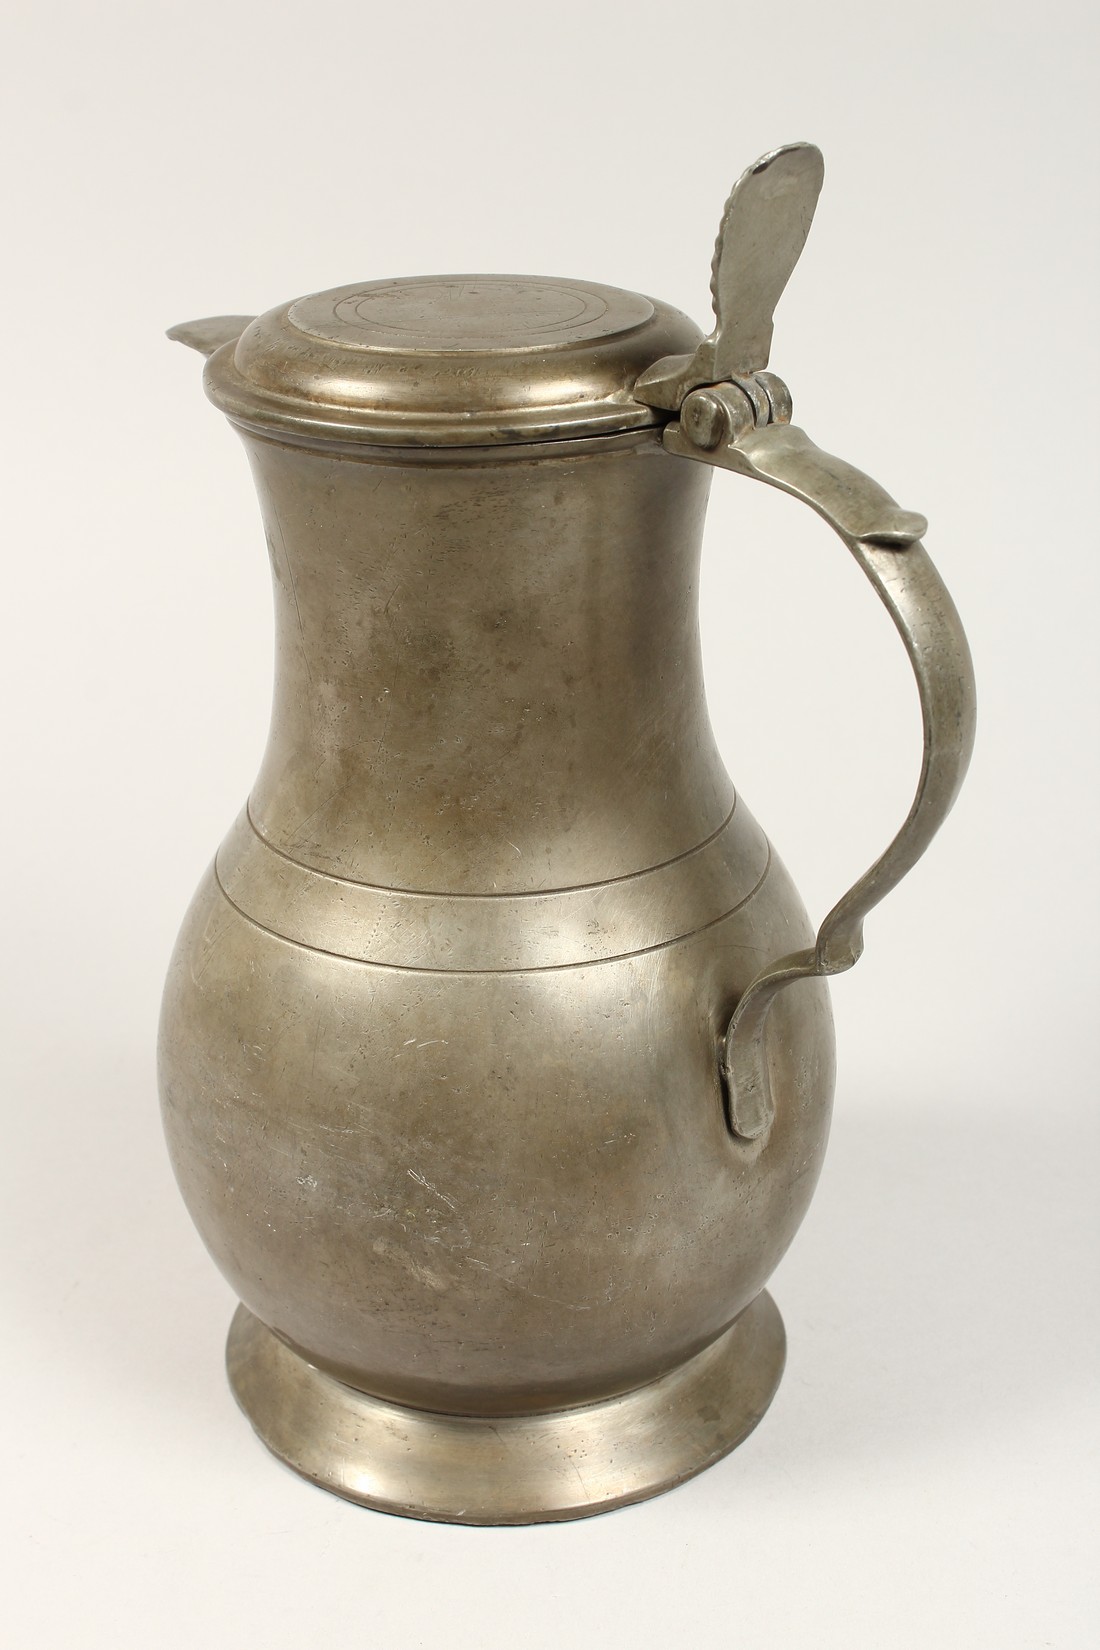 A FRENCH PEWTER LIDDED JUG 10ins high. - Image 2 of 4